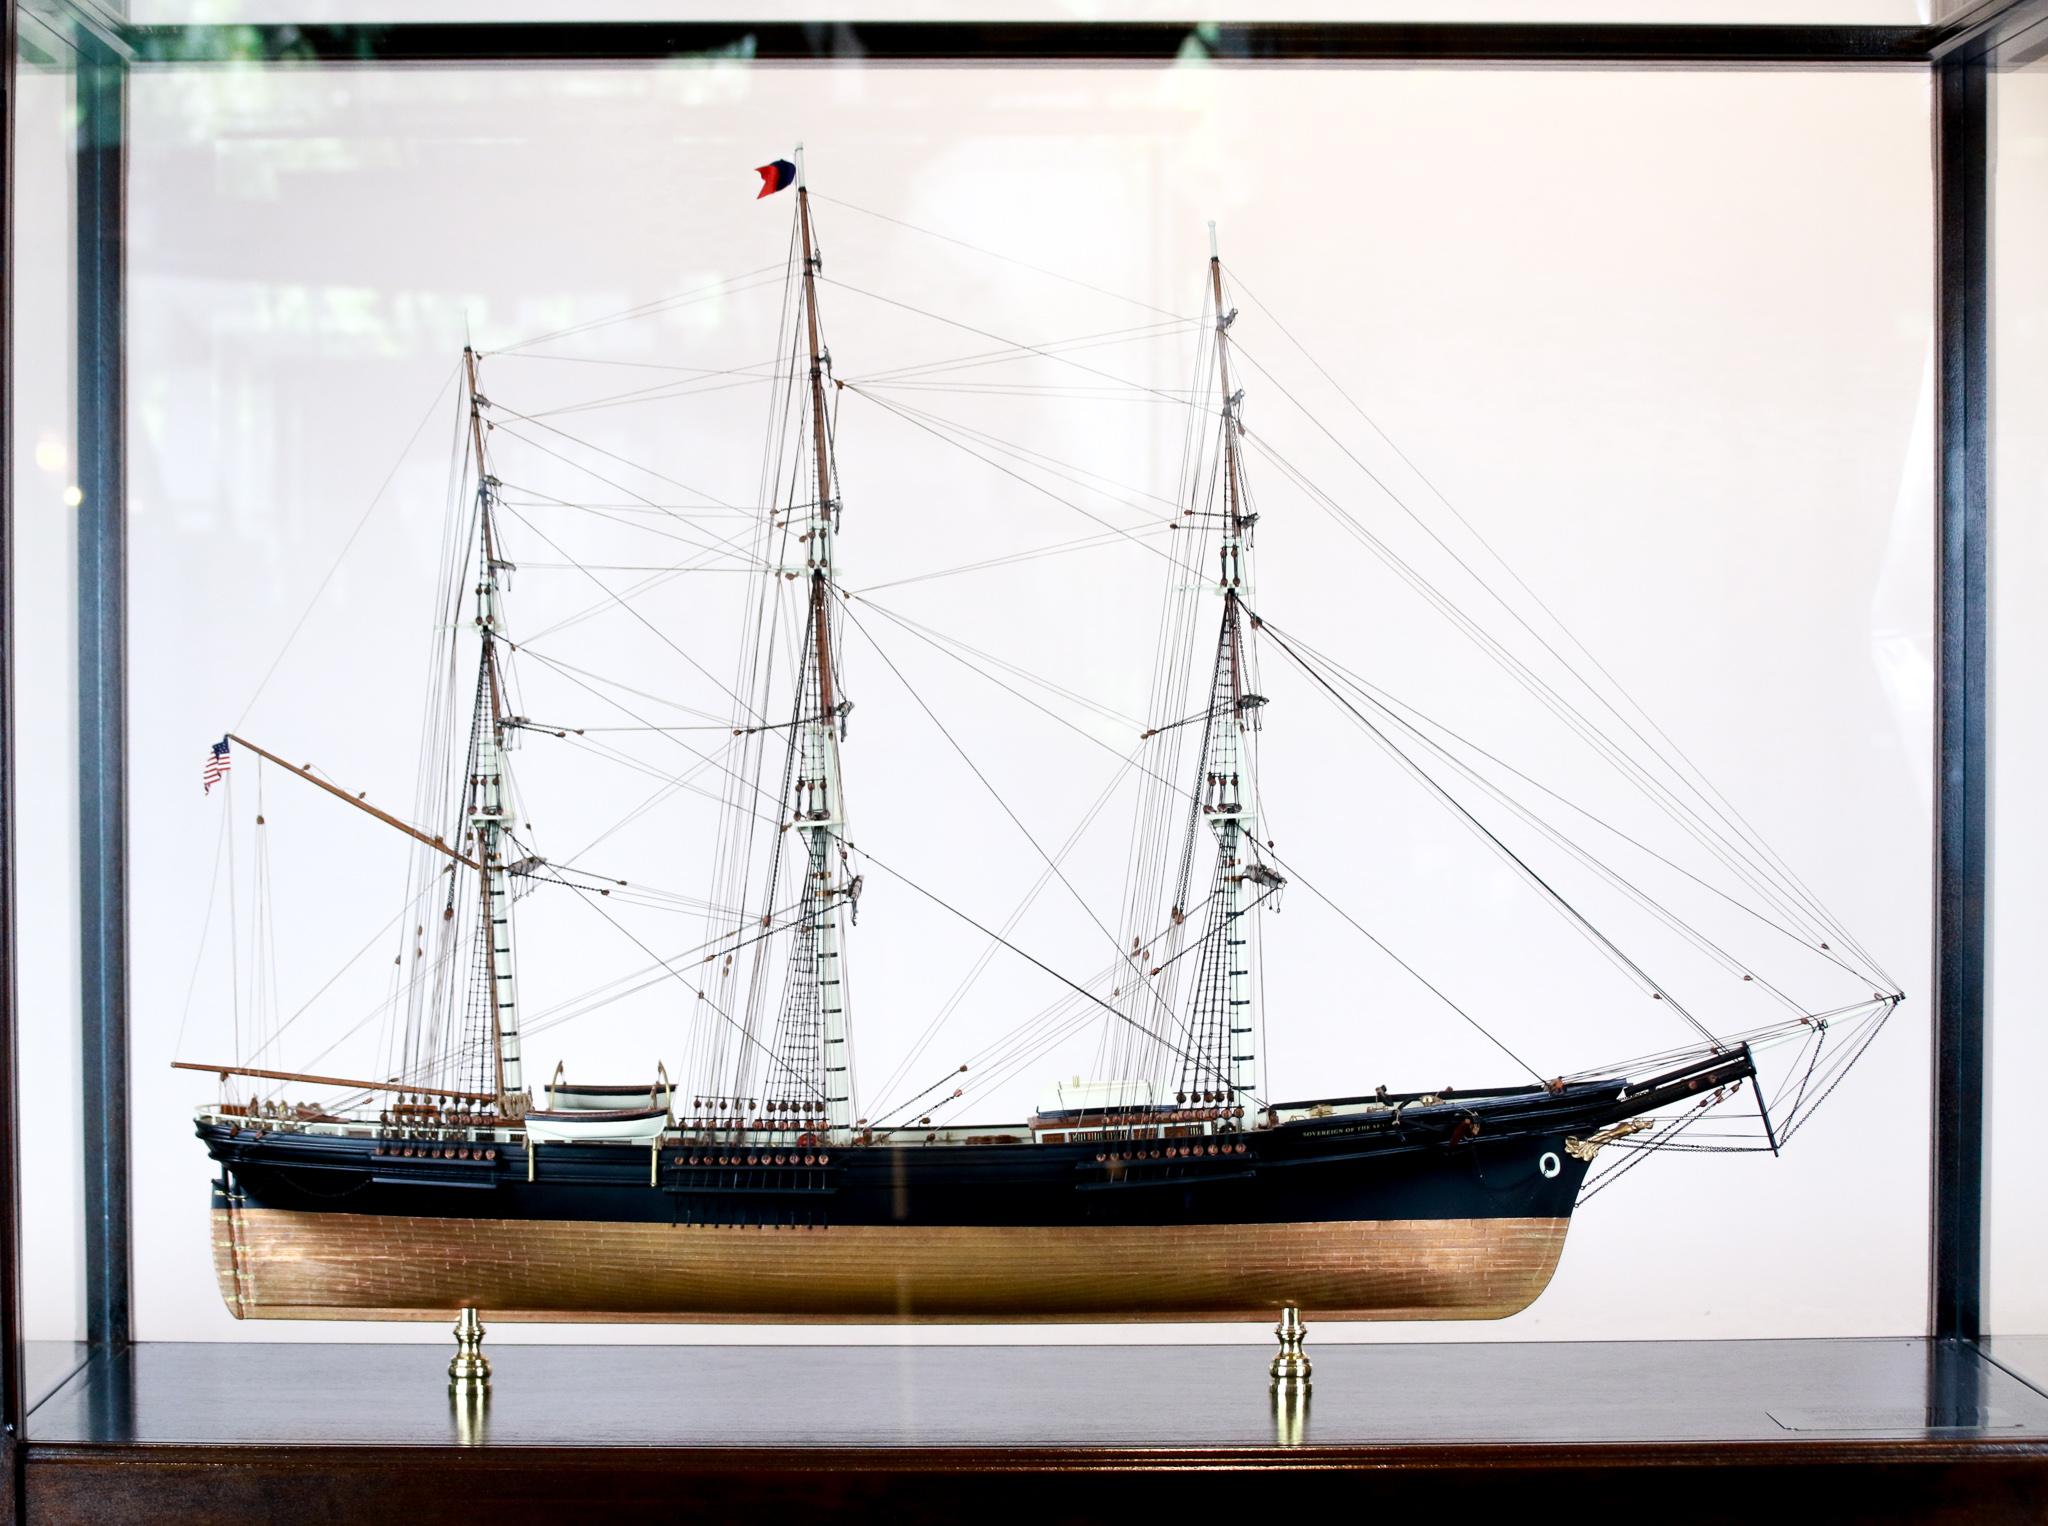 The fastest ship ever built. California clipper Sovereign of the Seas model. The Sovereign of the Seas was built in 1852 by renowned ship builder Donald McKay at his yard in East Boston. (September 4, 1810, September 20, 1880). In 1854 she recorded